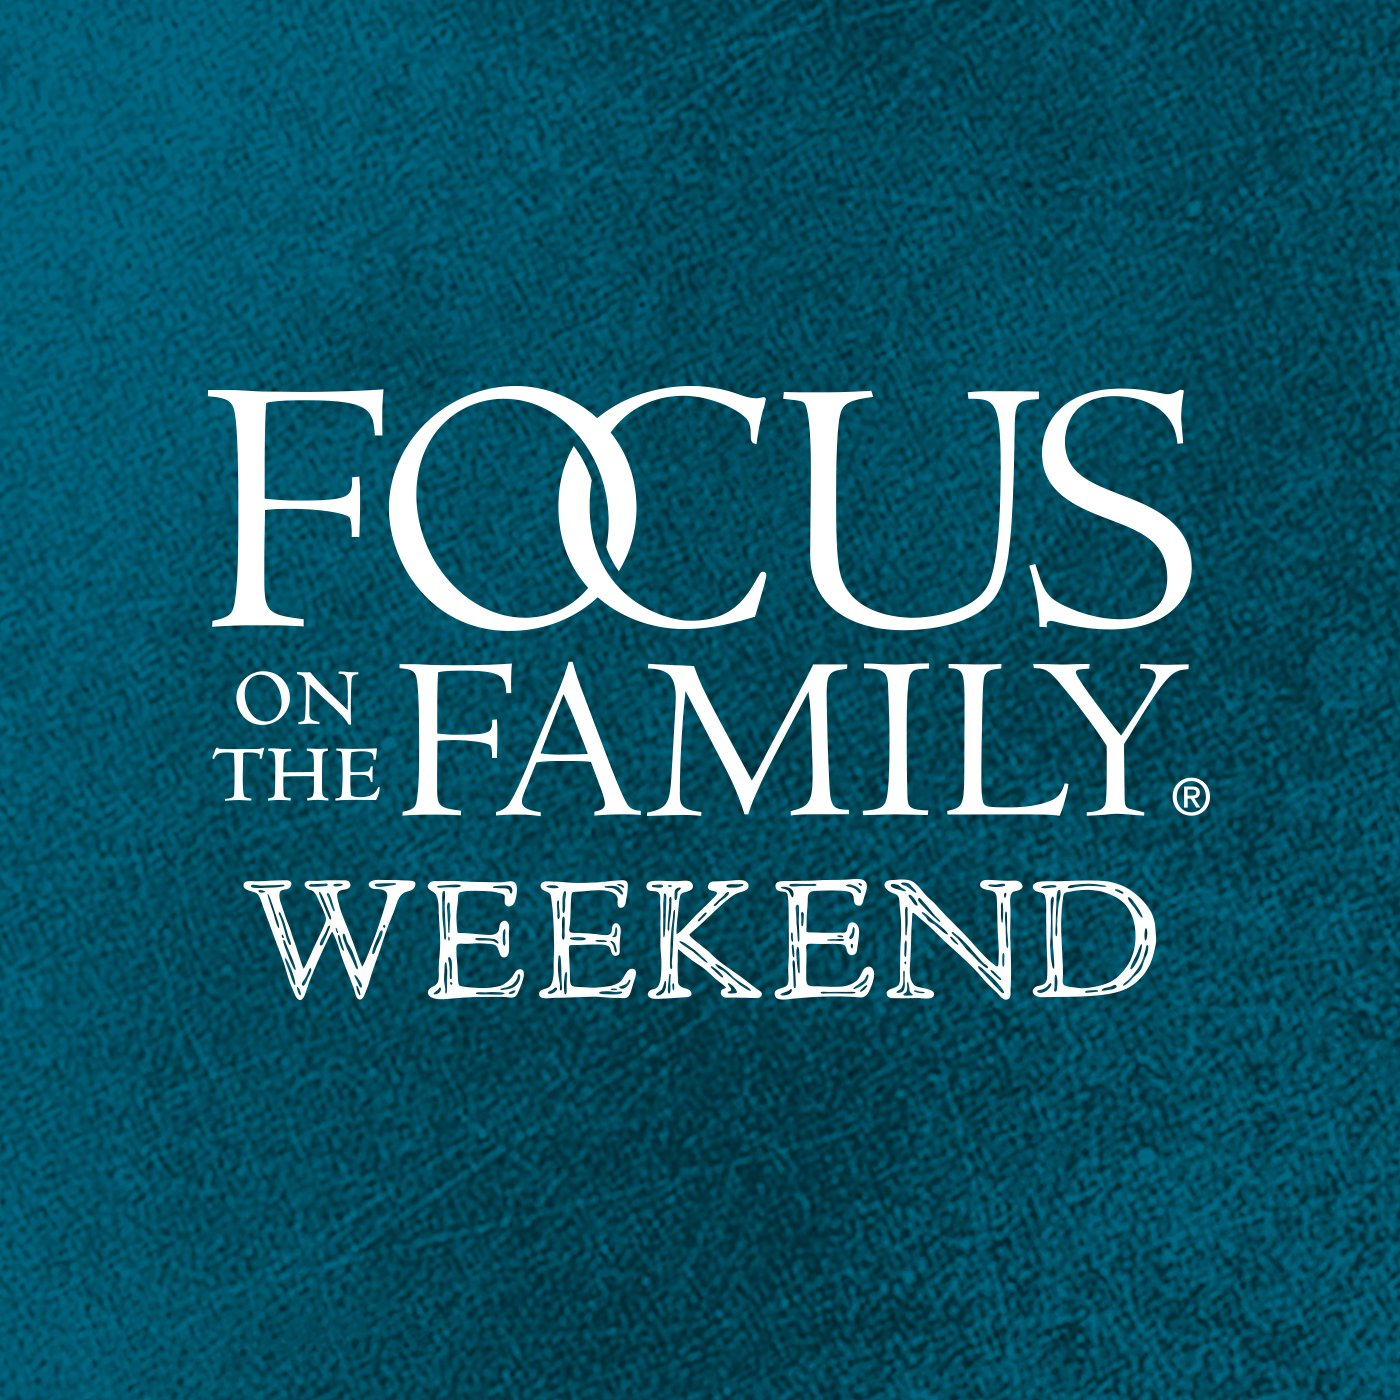 Focus on the Family Weekend: May. 21-22, 2022